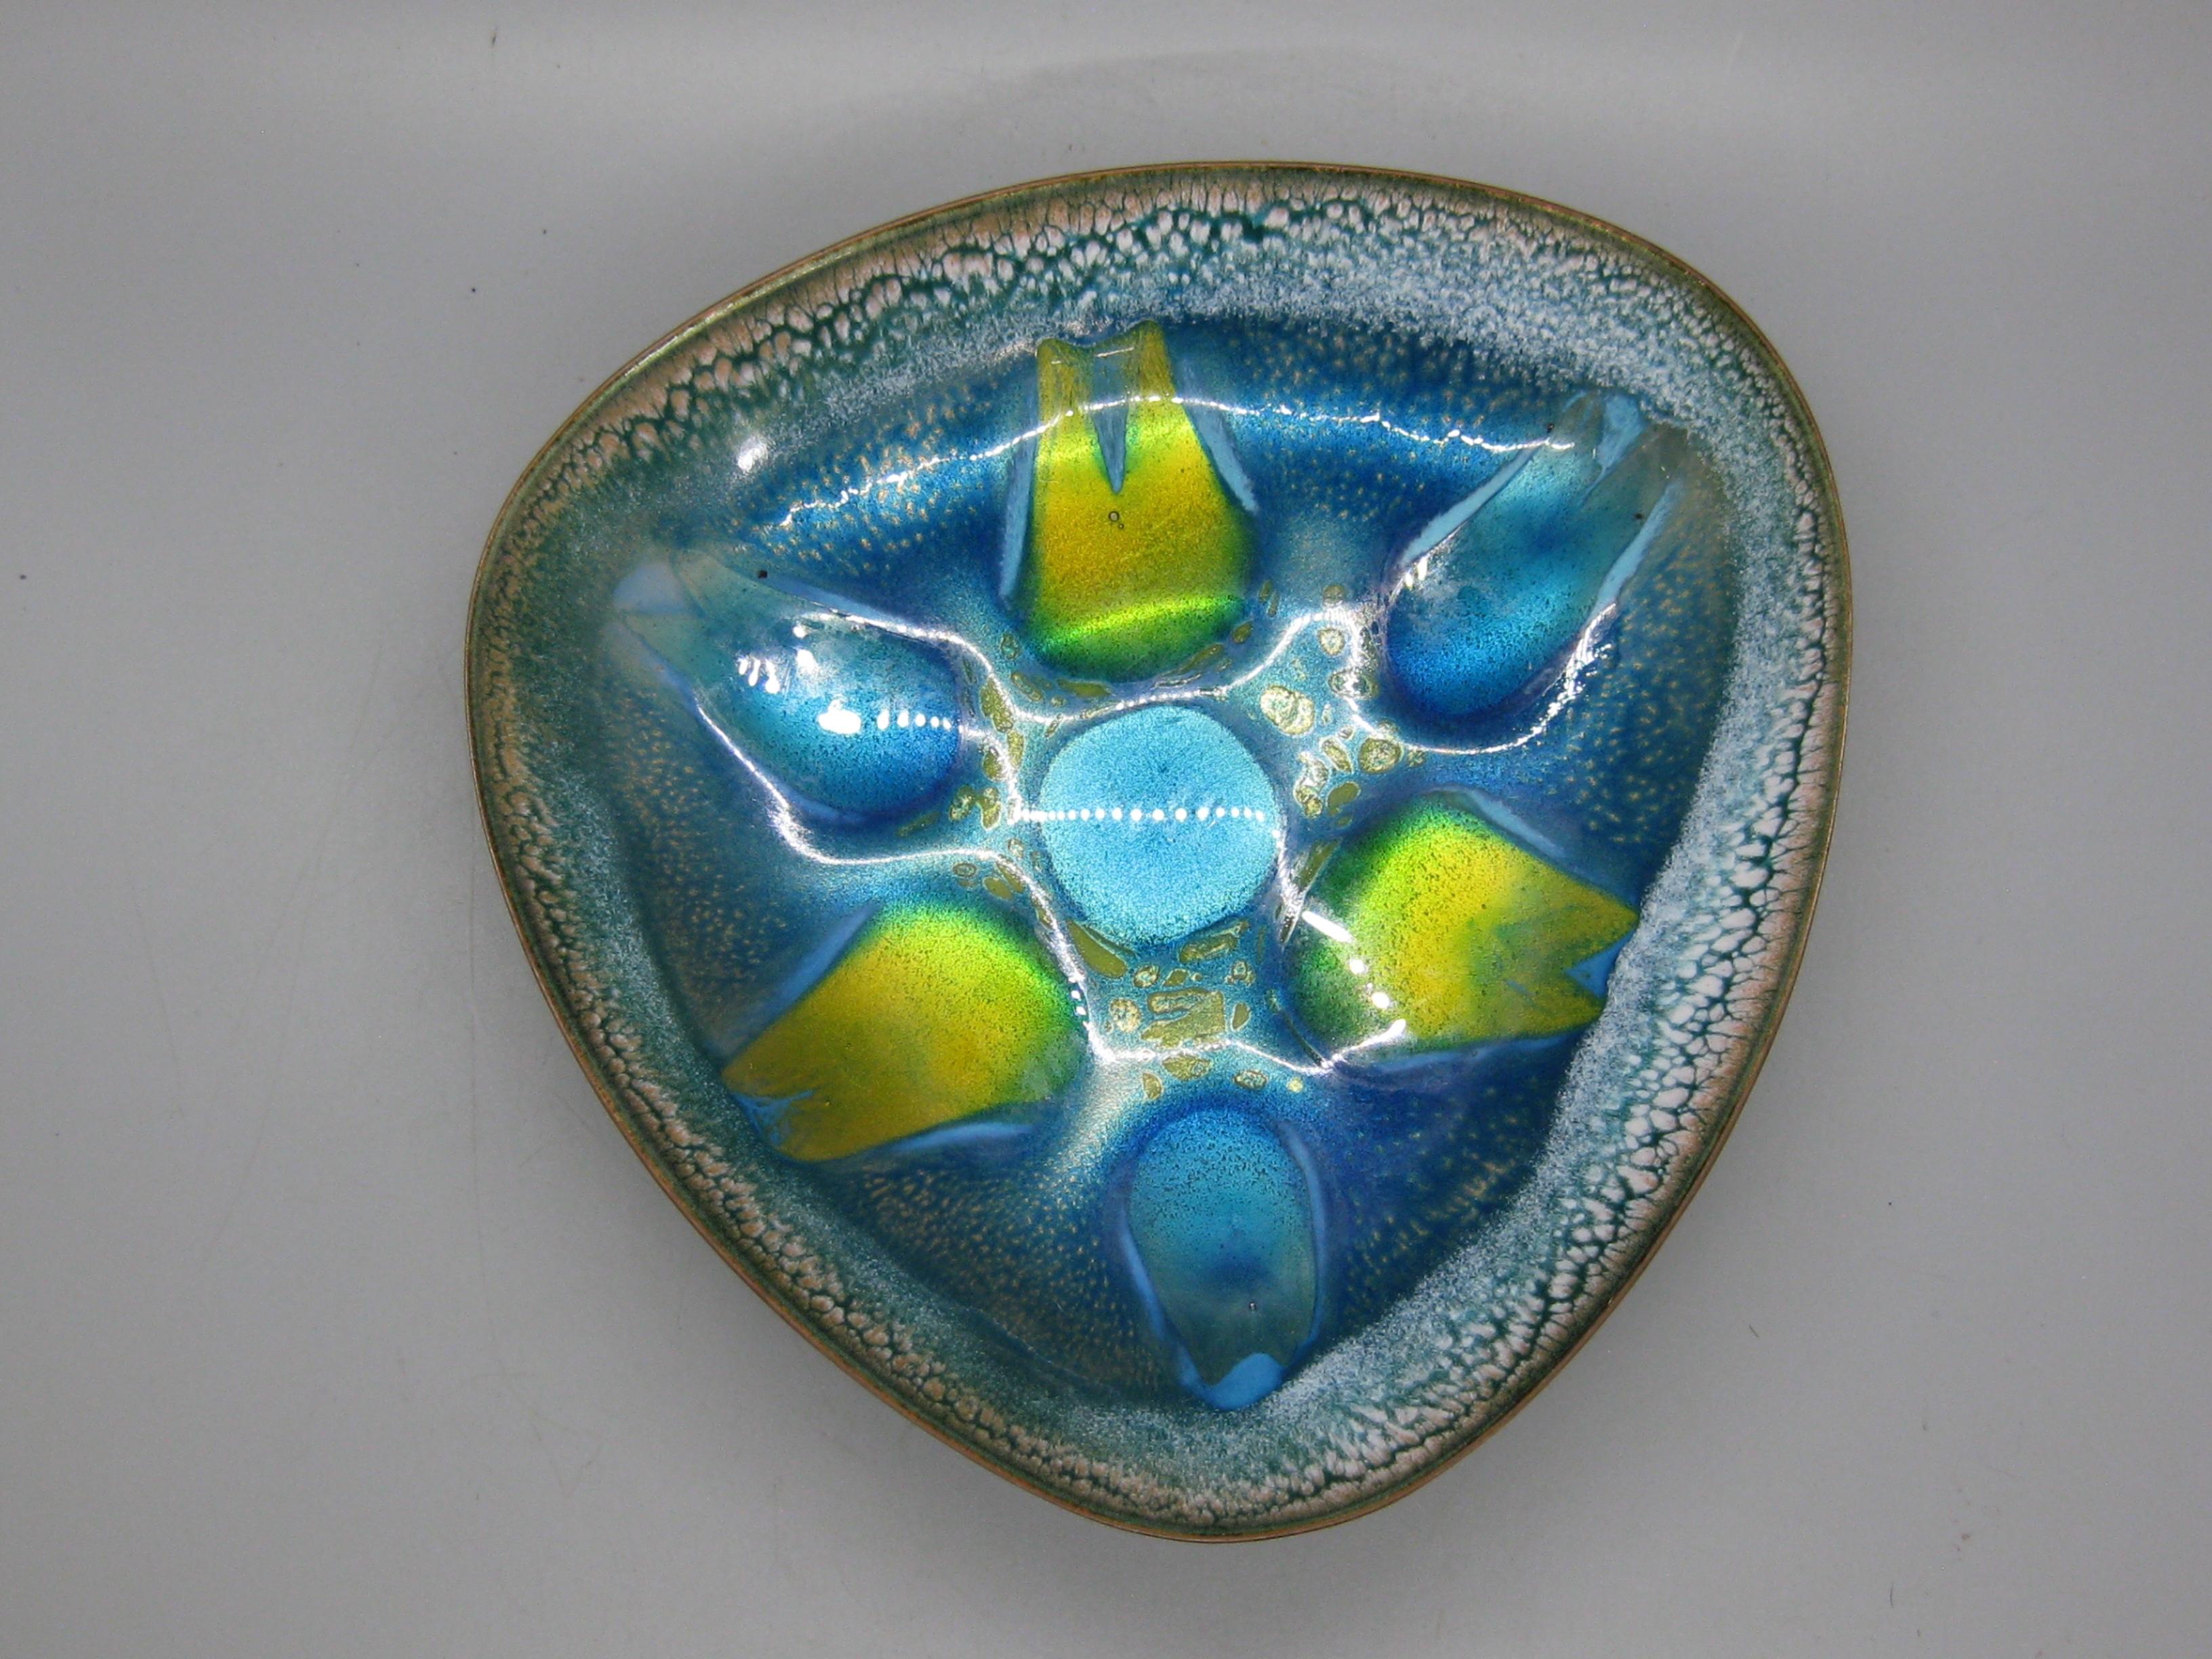 Wonderful vintage Fiammetta Hsieh Rubin enamel on copper abstract triangle bowl/dish dating from 1969. This is an early piece by this artist. Signed and dated by the artist on the side. Has a wonderful blue, yellow and green abstract enamel form.